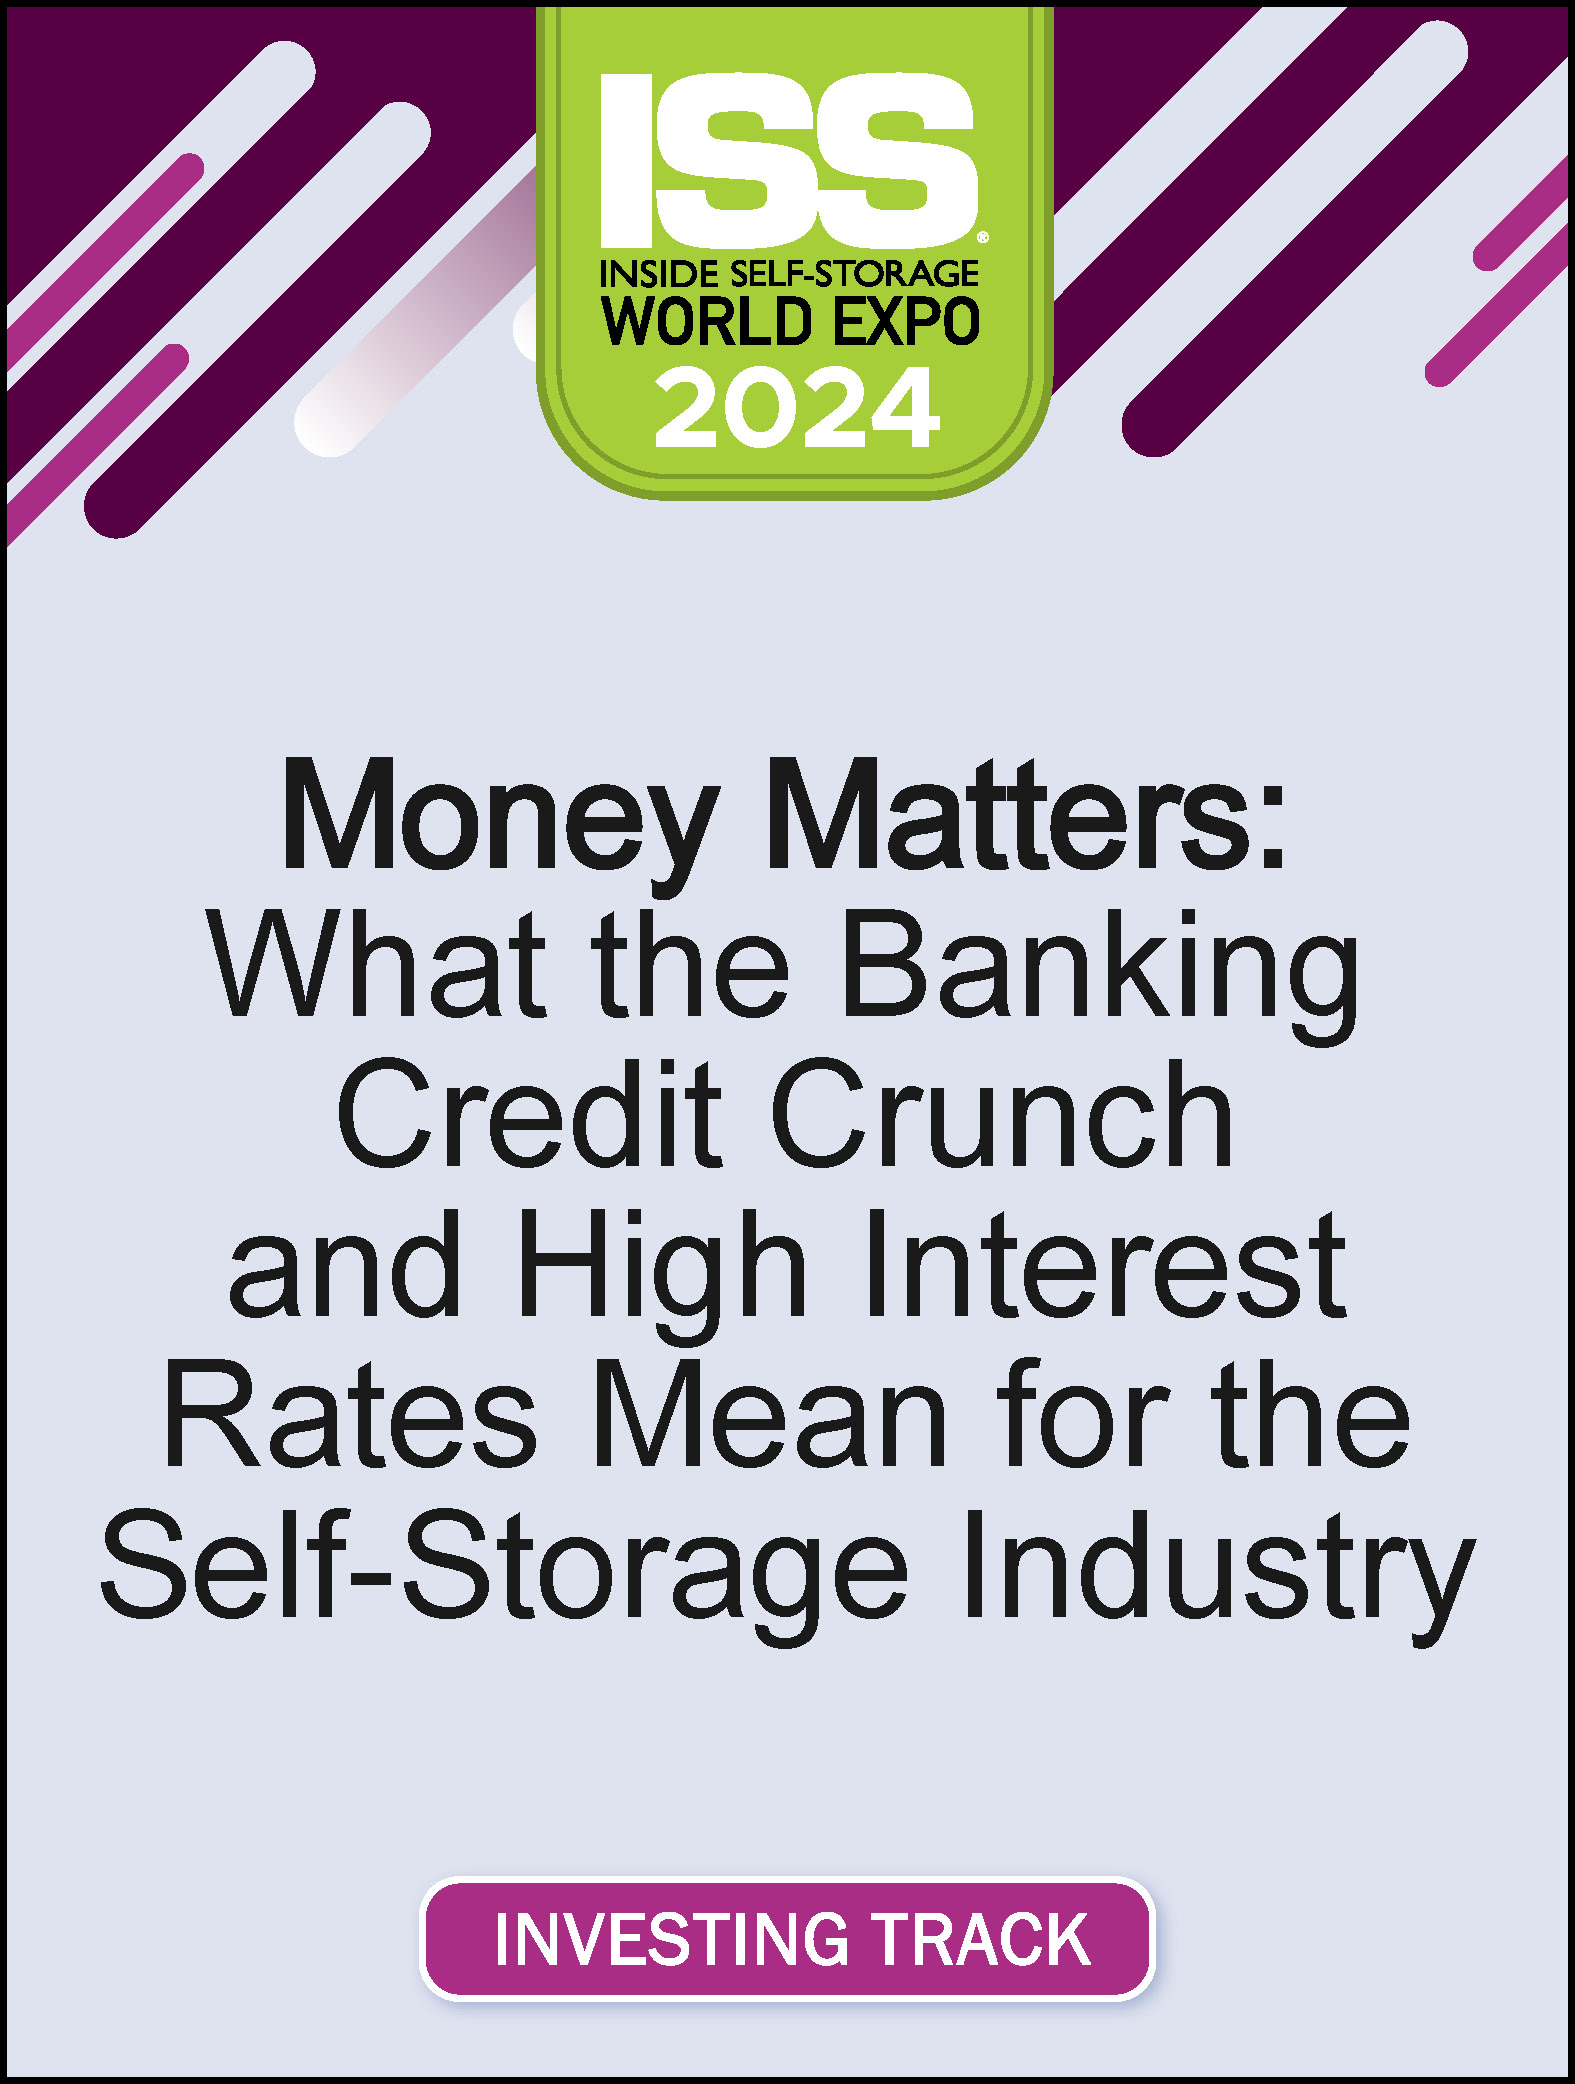 Video Pre-Order Sub - Money Matters: What the Banking Credit Crunch and High Interest Rates Mean for the Self-Storage Industry